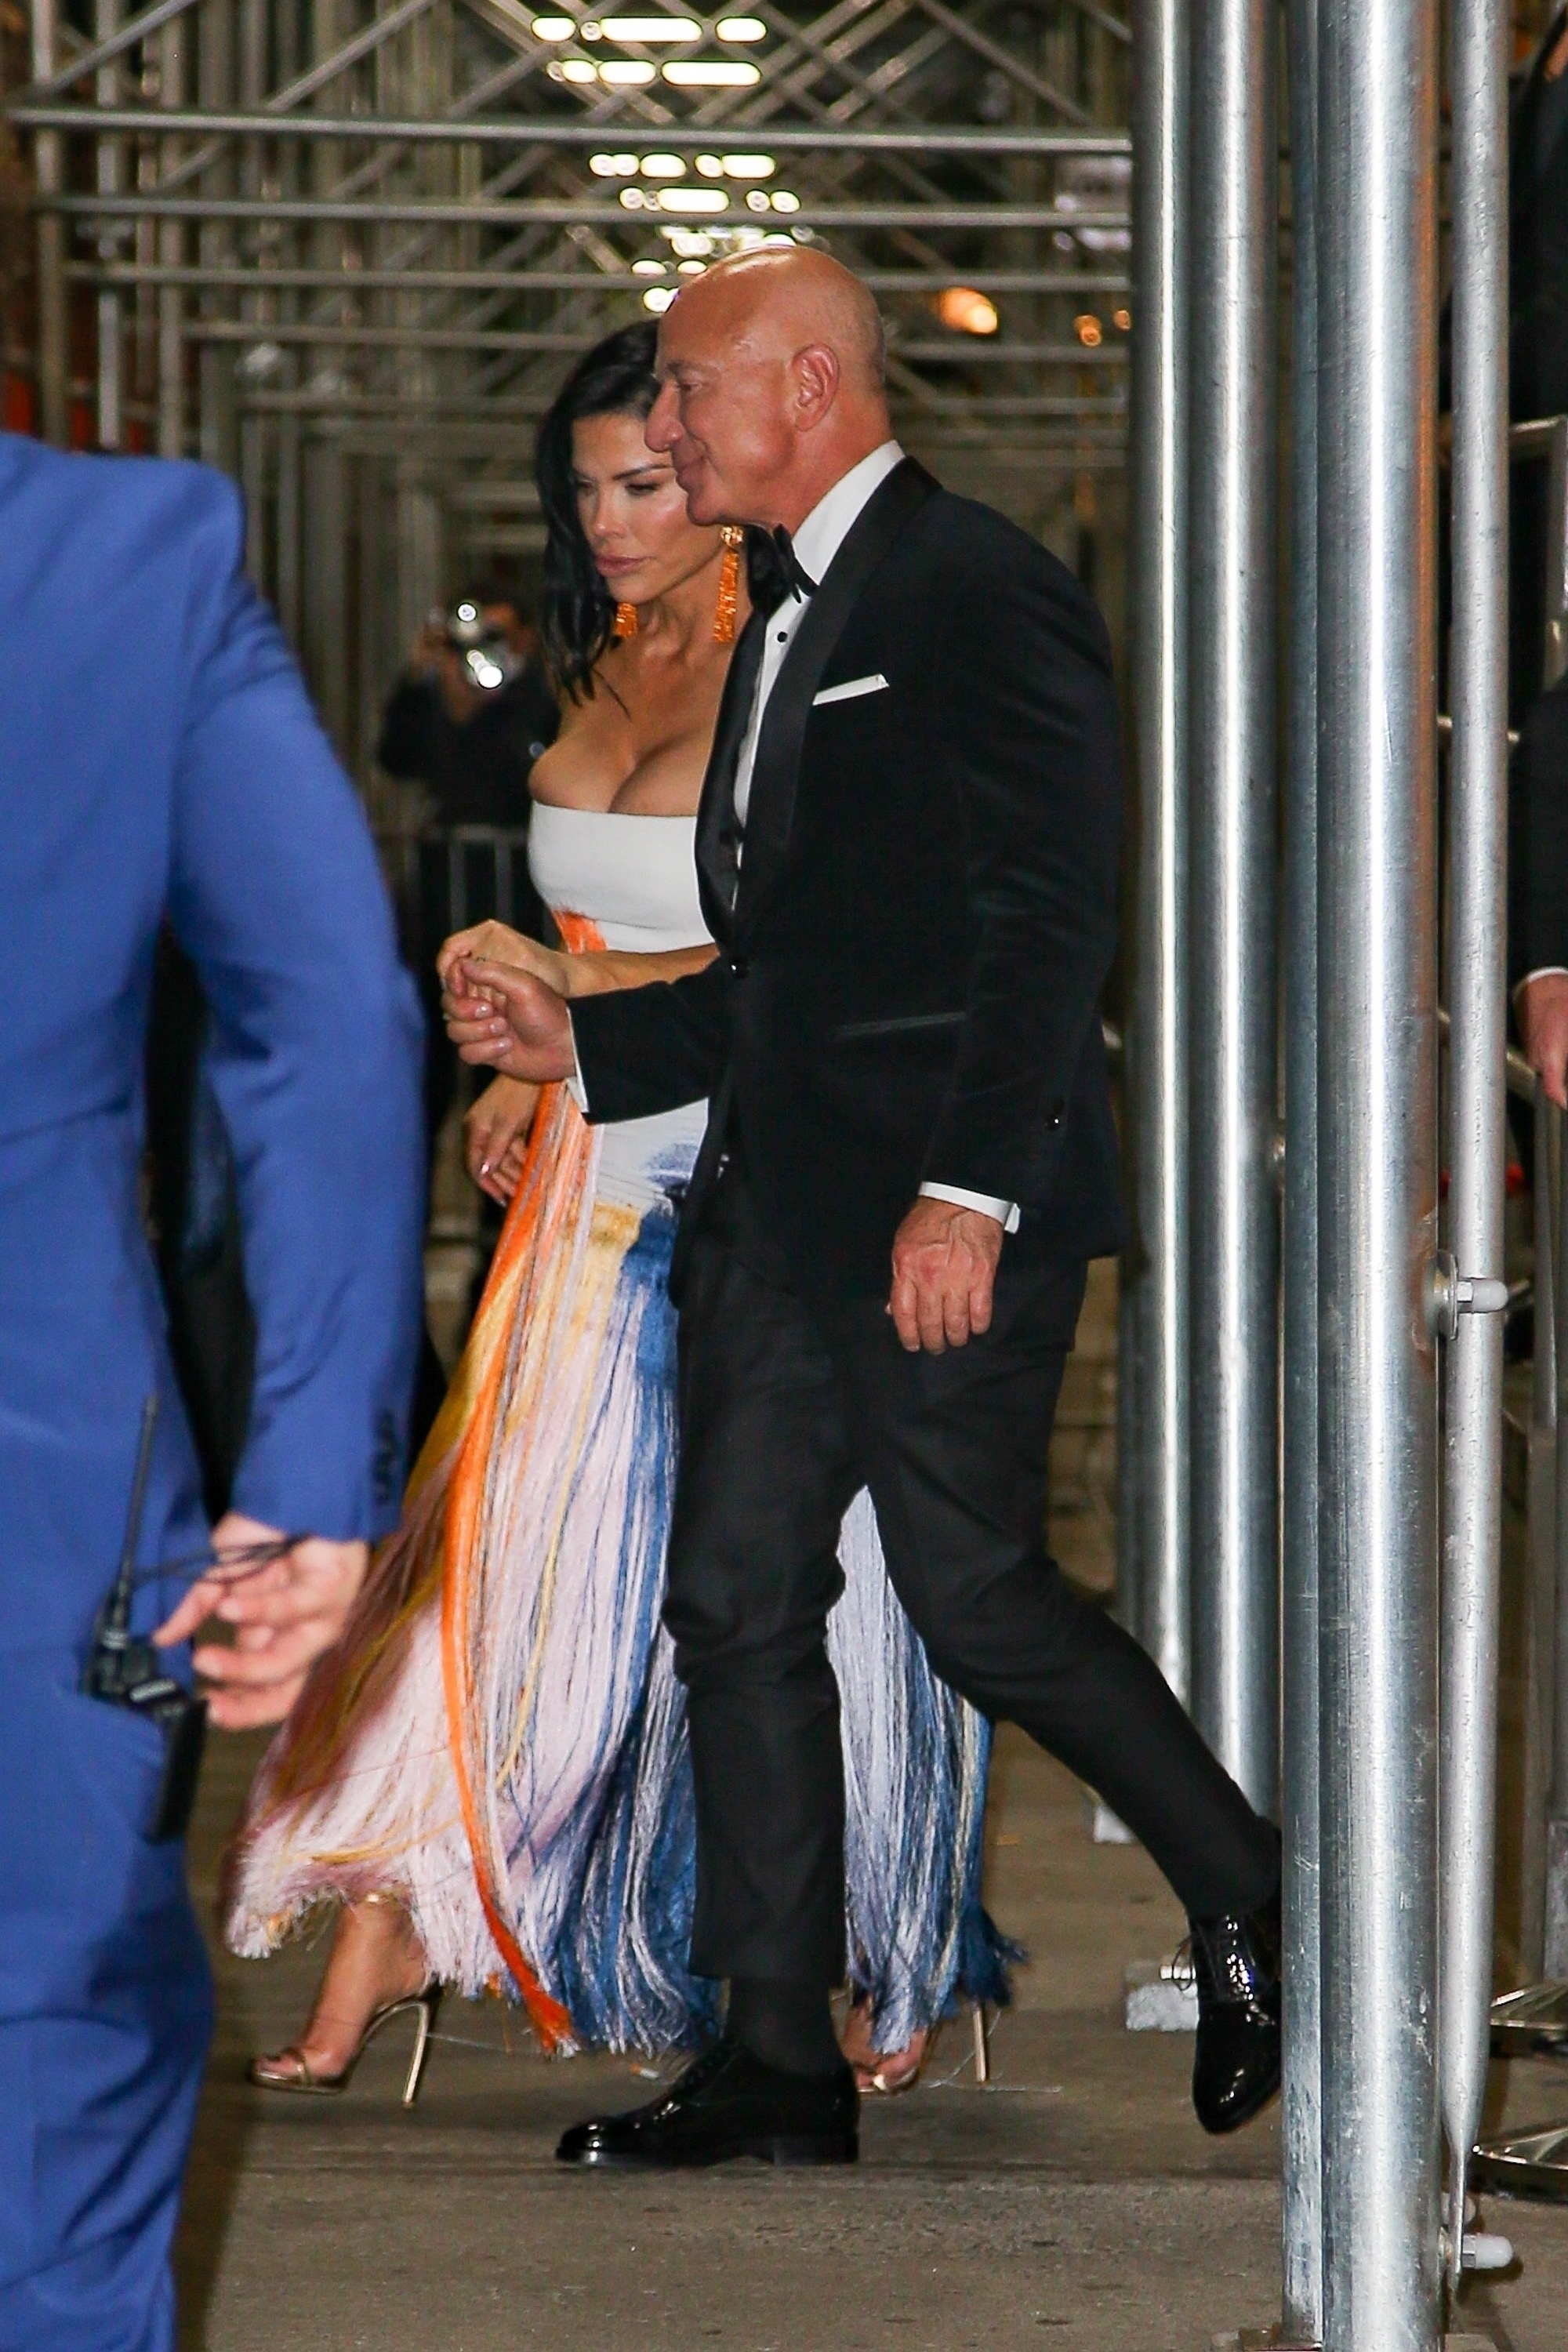 Two persons walking, woman in dress with layered fringe detail, man in black suit and bow tie